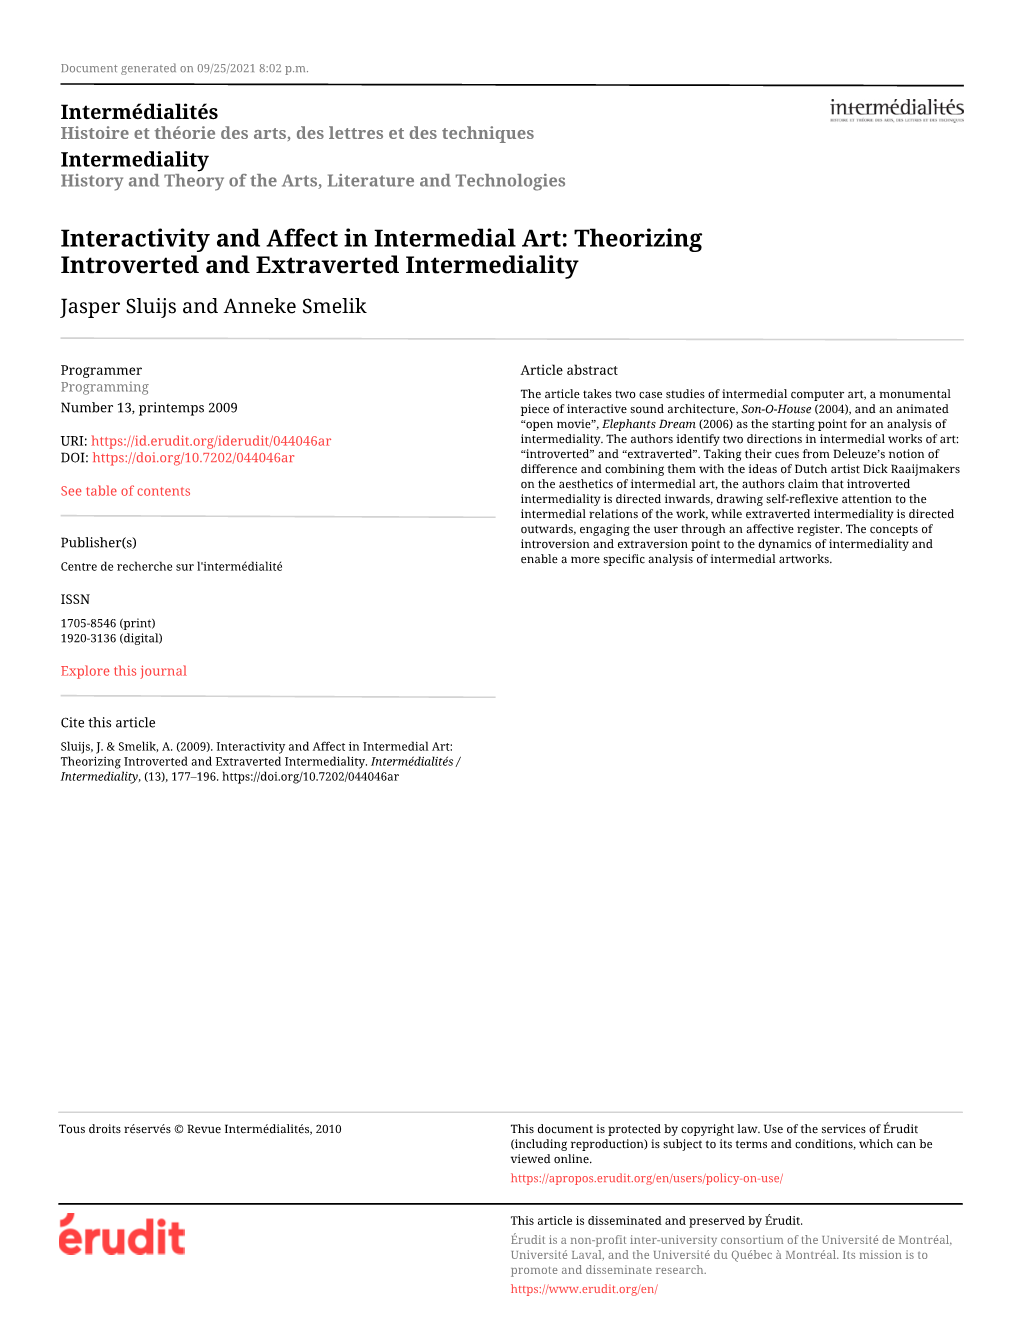 Interactivity and Affect in Intermedial Art: Theorizing Introverted and Extraverted Intermediality Jasper Sluijs and Anneke Smelik